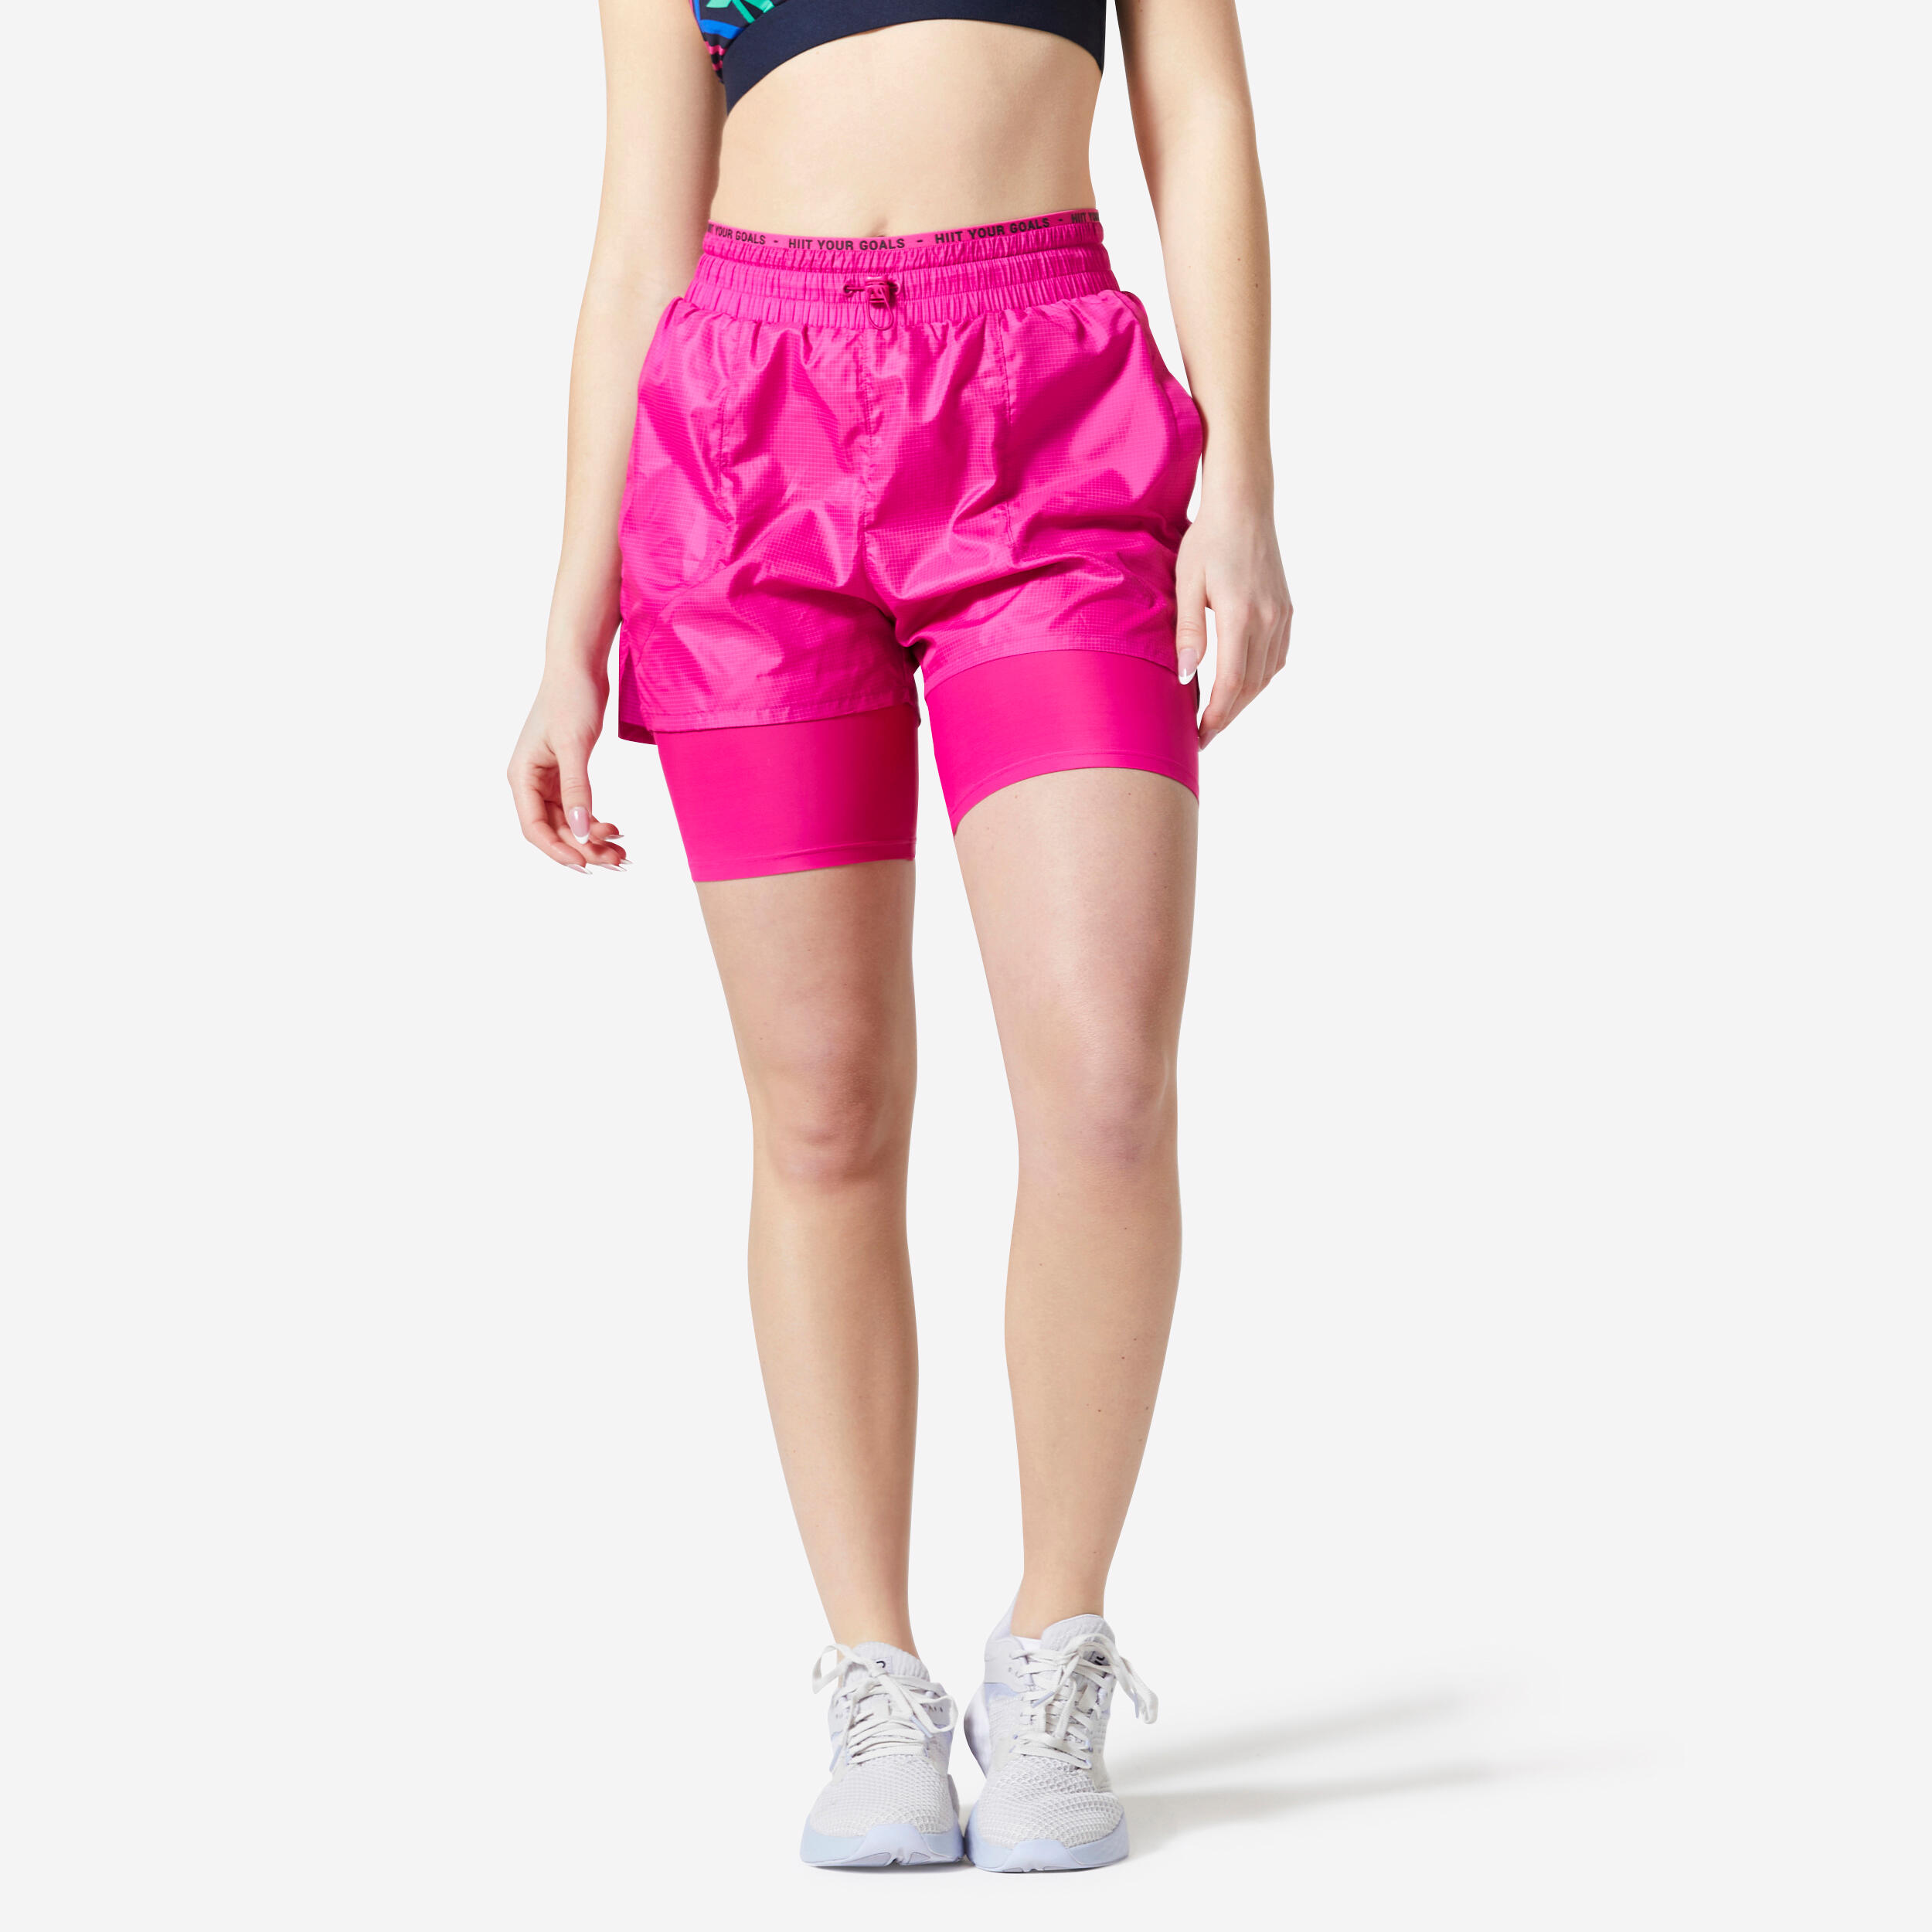 DOMYOS Women's 2-in-1 Fitness Cardio Shorts - Pink